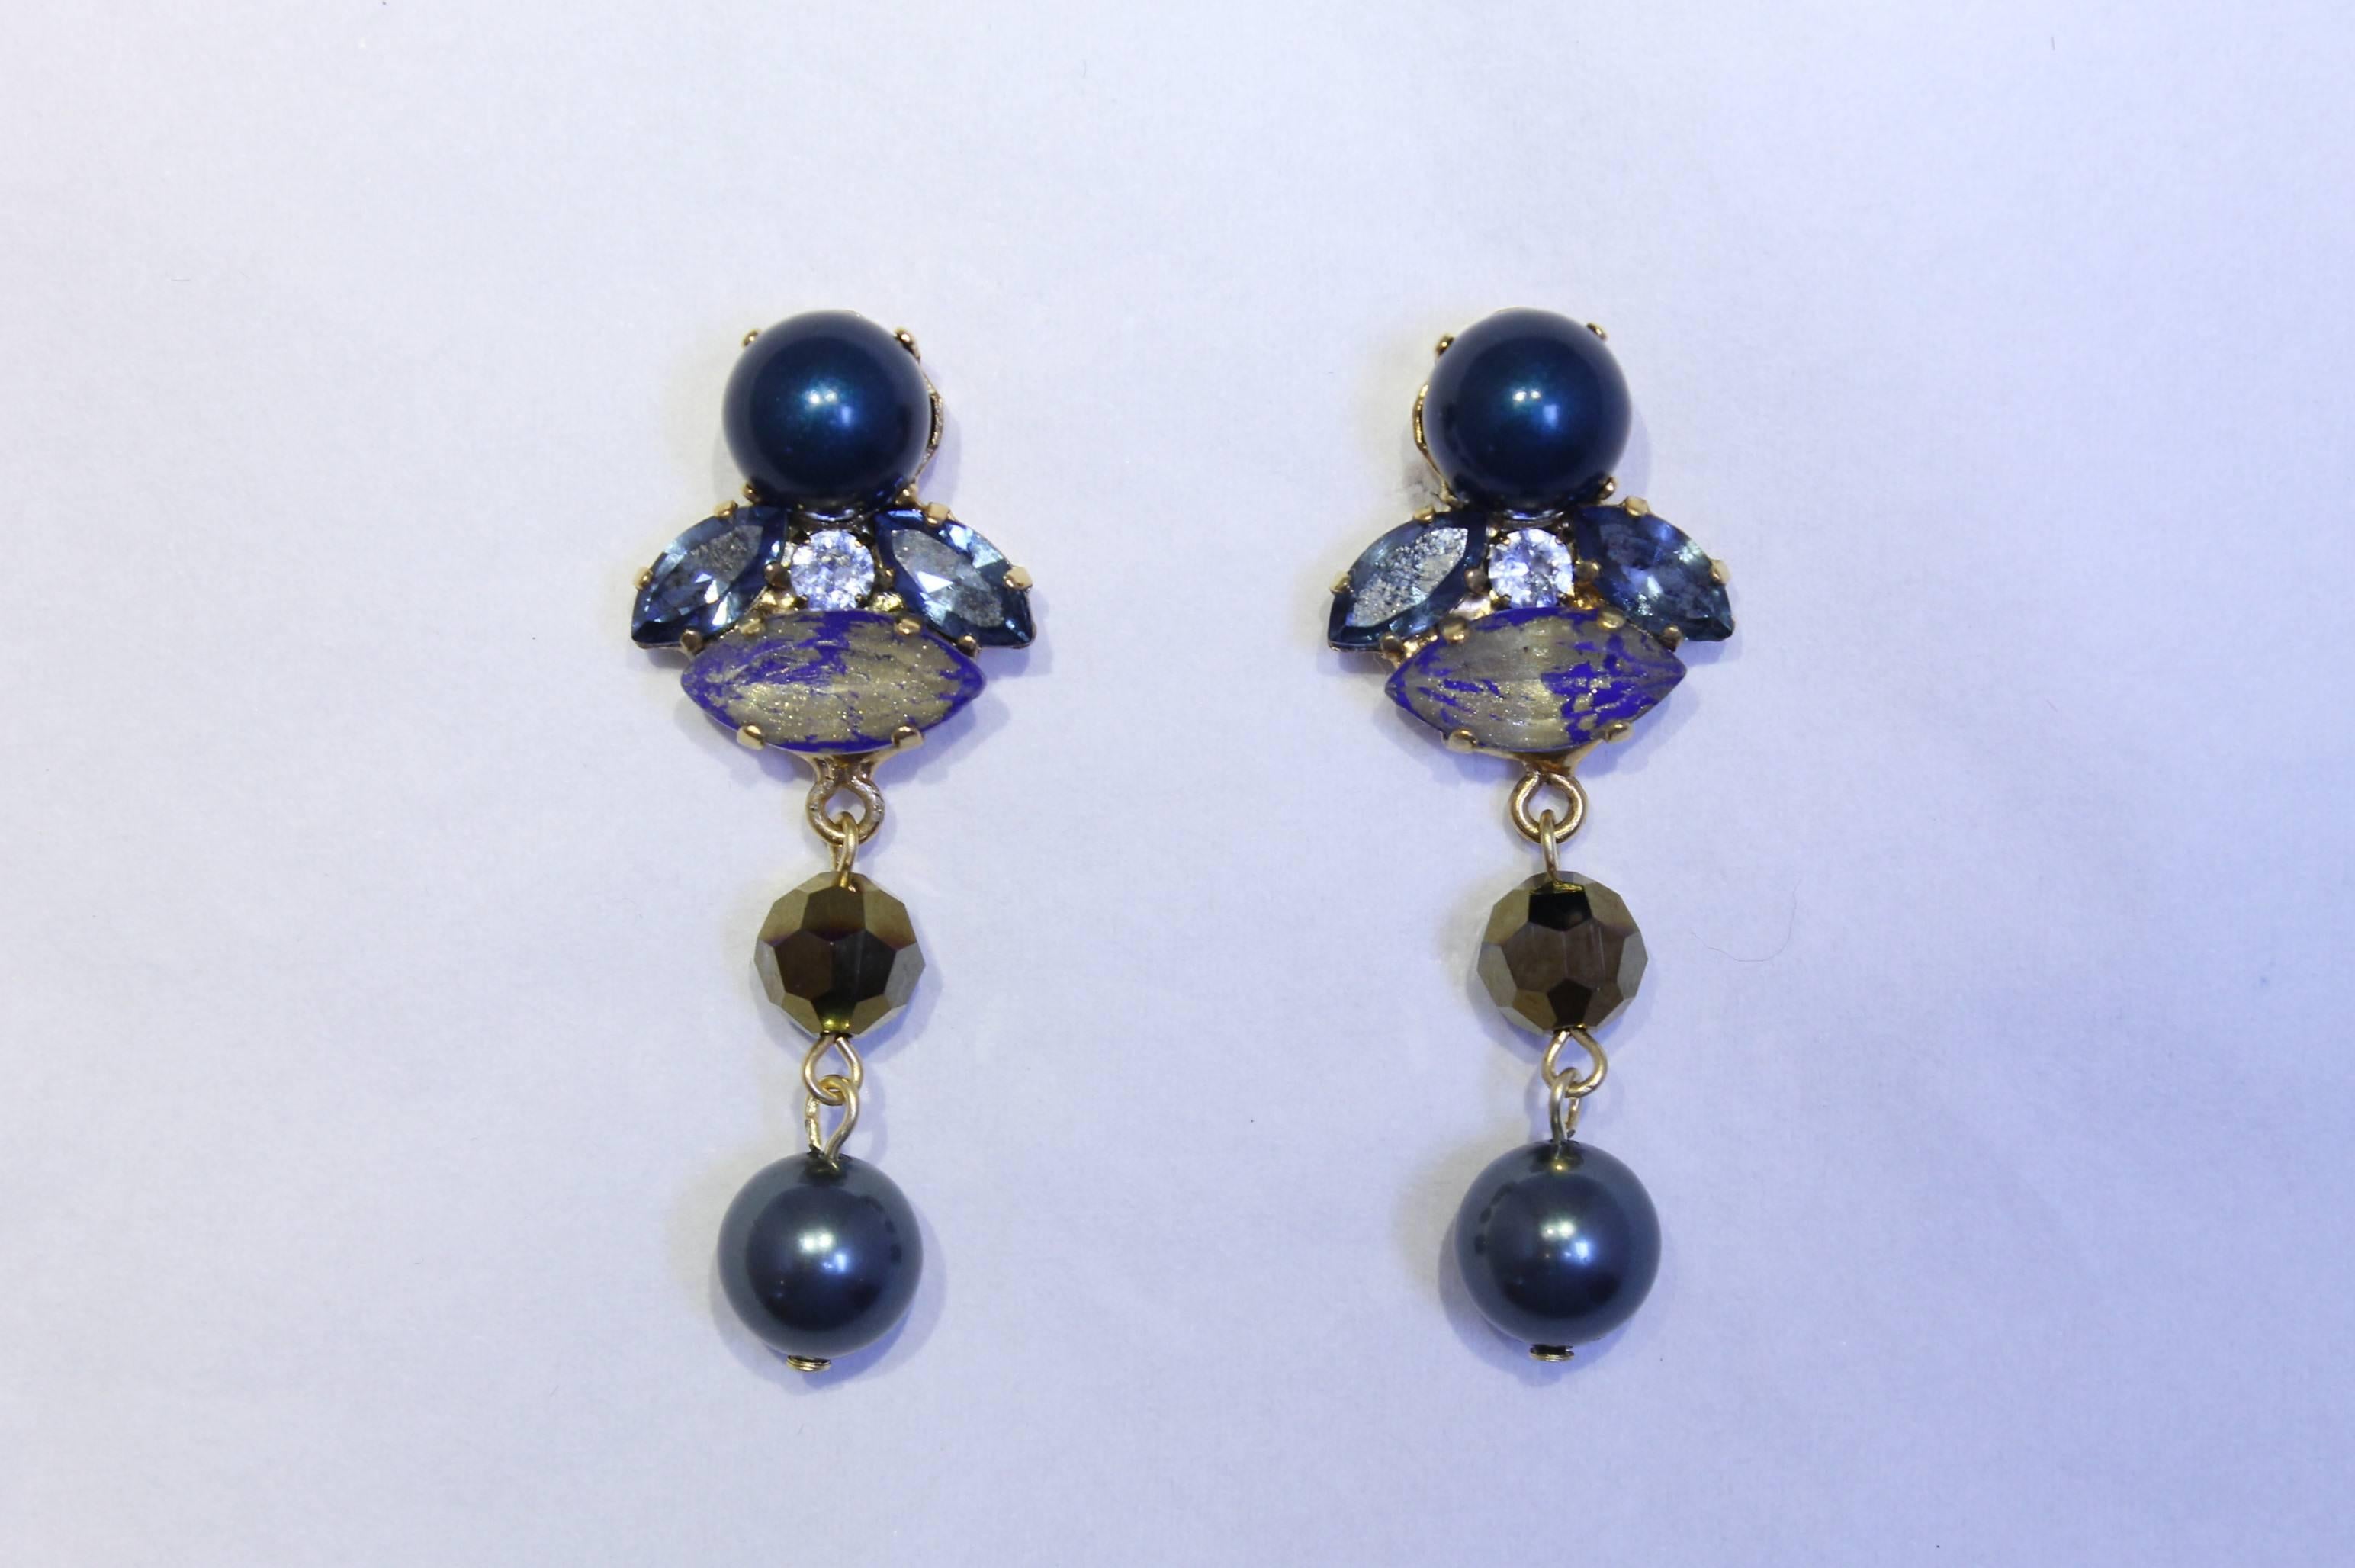 Gorgeous blue and gold hand-enamelled Swarovski crystal and pearl earrings, making each one utterly unique. No two are the same

Refined colour palette from the Earring Expert, VICKISARGE

Handmade for the past 25 years by Vicki’s small team of